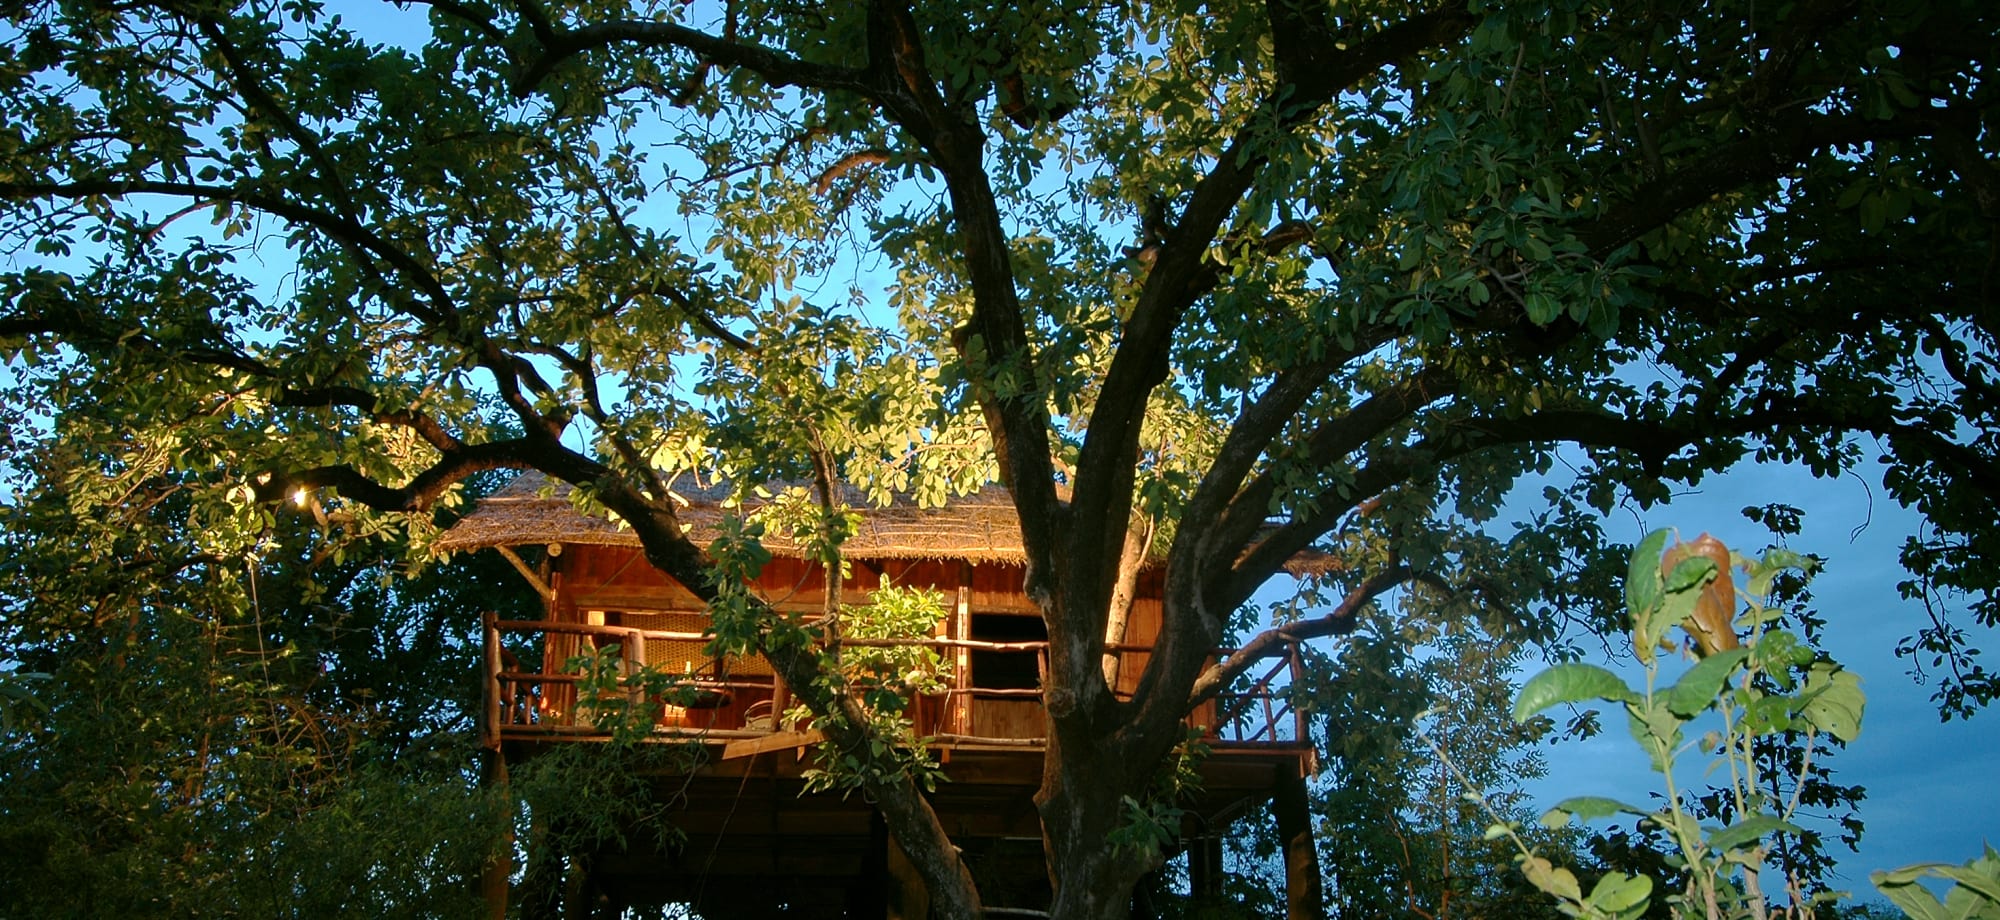 A treehouse built within large trees